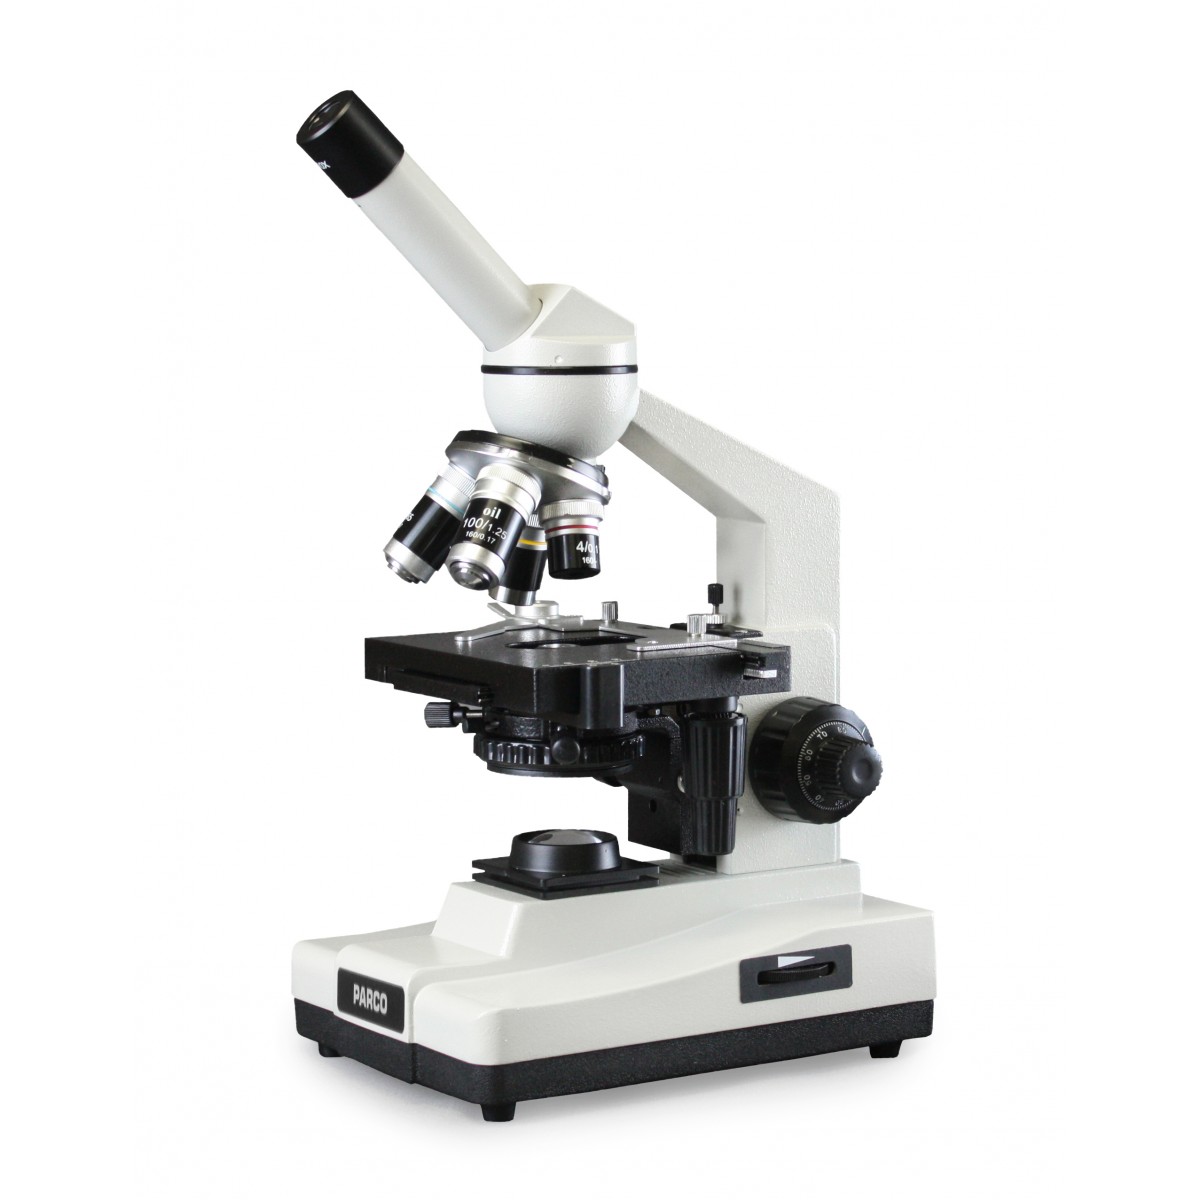 Advanced Research Material Microscope - Industrial 